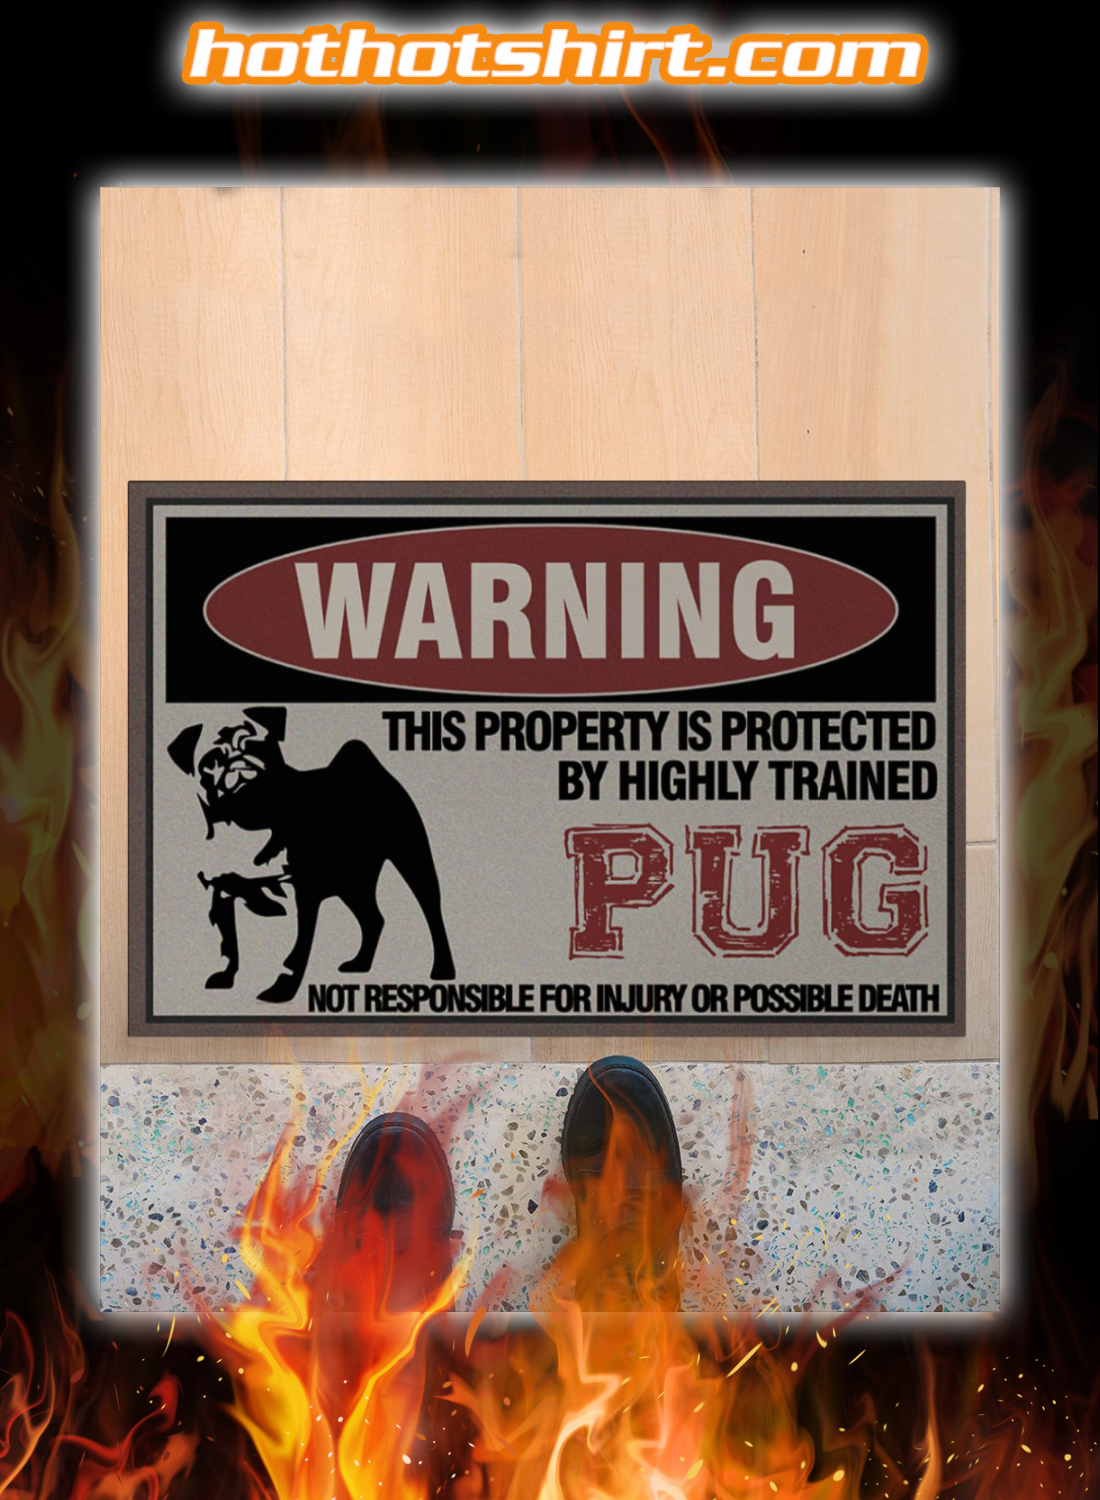 Warning Highly Trained Pug Protected This Property Doormat 1